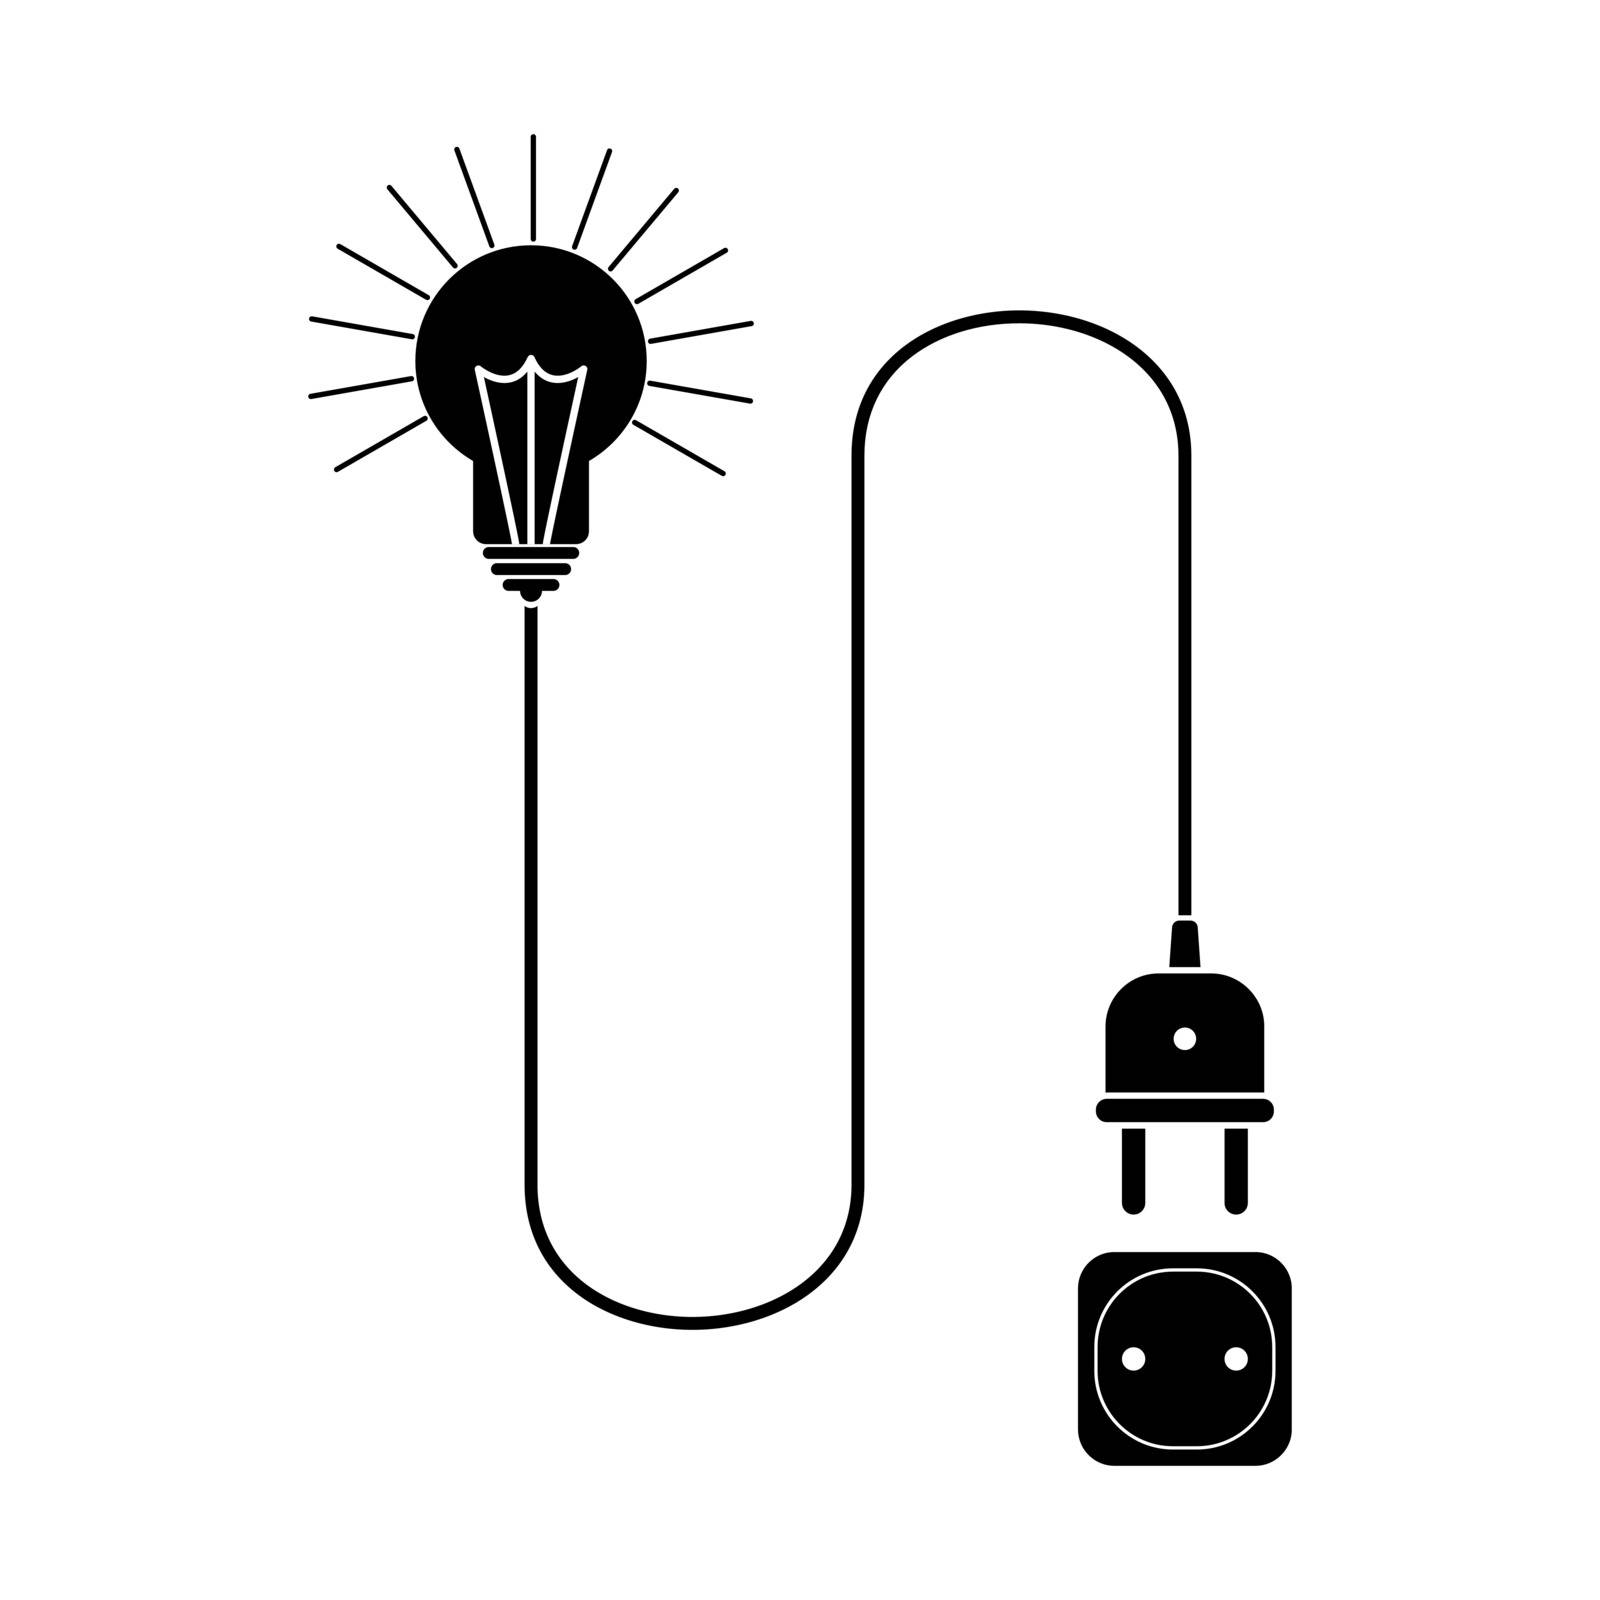 Light bulb with wire attached to the power supply by Grommik